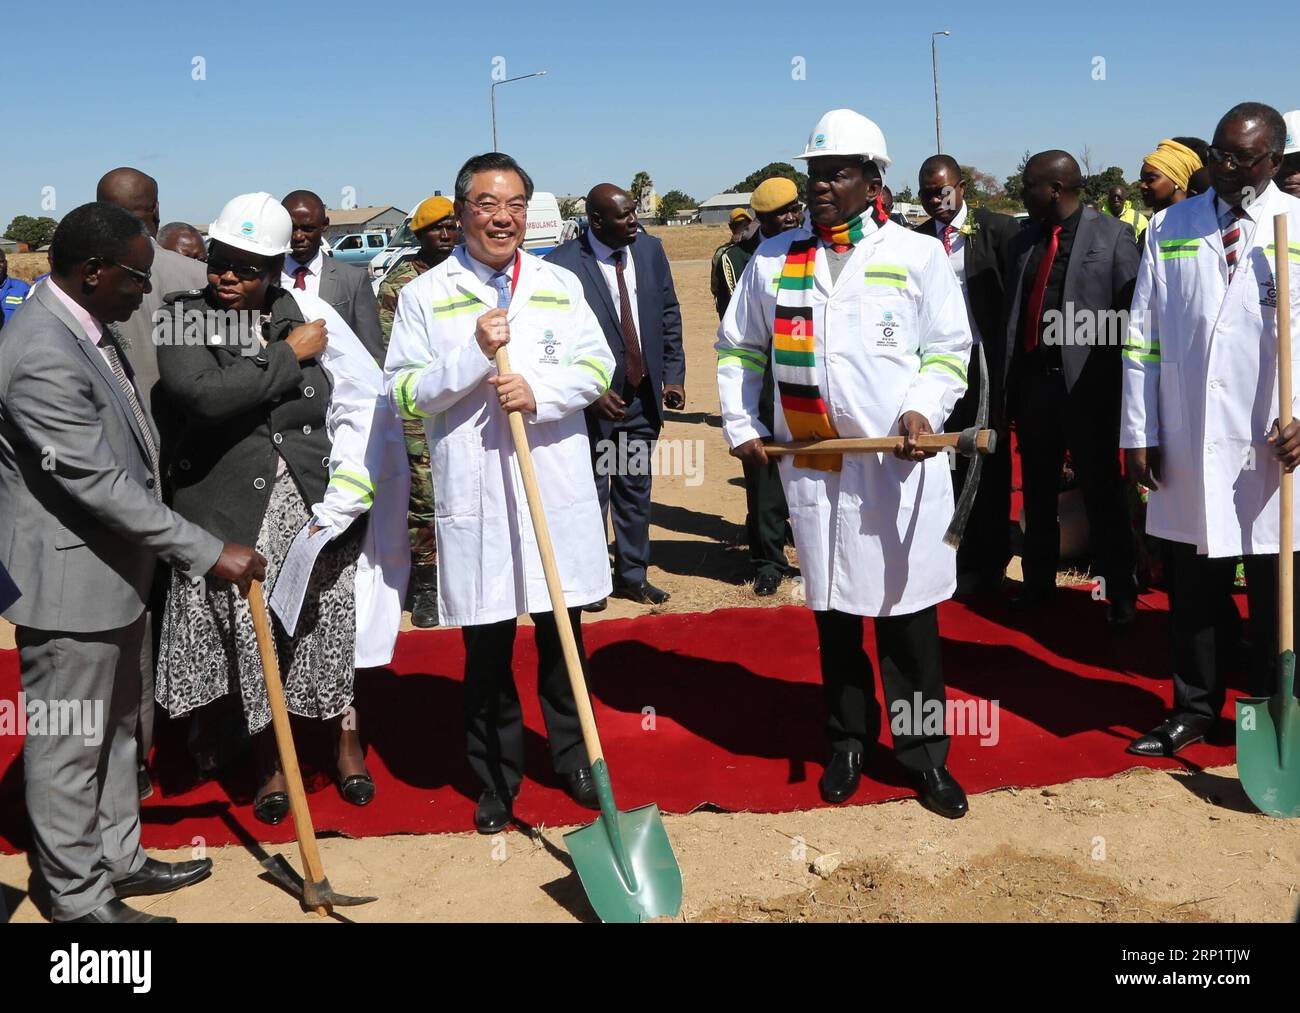 (180723) -- HARARE, July 23, 2018 -- Zimbabwean President Emmerson Mnangagwa (2nd R, Front) and Chinese Ambassador to Zimbabwe Huang Ping (3rd L, Front) lay the foundation of the upgrading and expansion project of the Robert Gabriel Mugabe International Airport in Harare, Zimbabwe, on July 23, 2018. Zimbabwe s main airport is set to undergo a major facelift to be funded by China as part of the government s efforts to transform the facility into a regional aviation hub. ) ZIMBABWE-HARARE-AIRPORT-UPGRADING AND EXPANSION WORK ZhangxYuliang PUBLICATIONxNOTxINxCHN Stock Photo